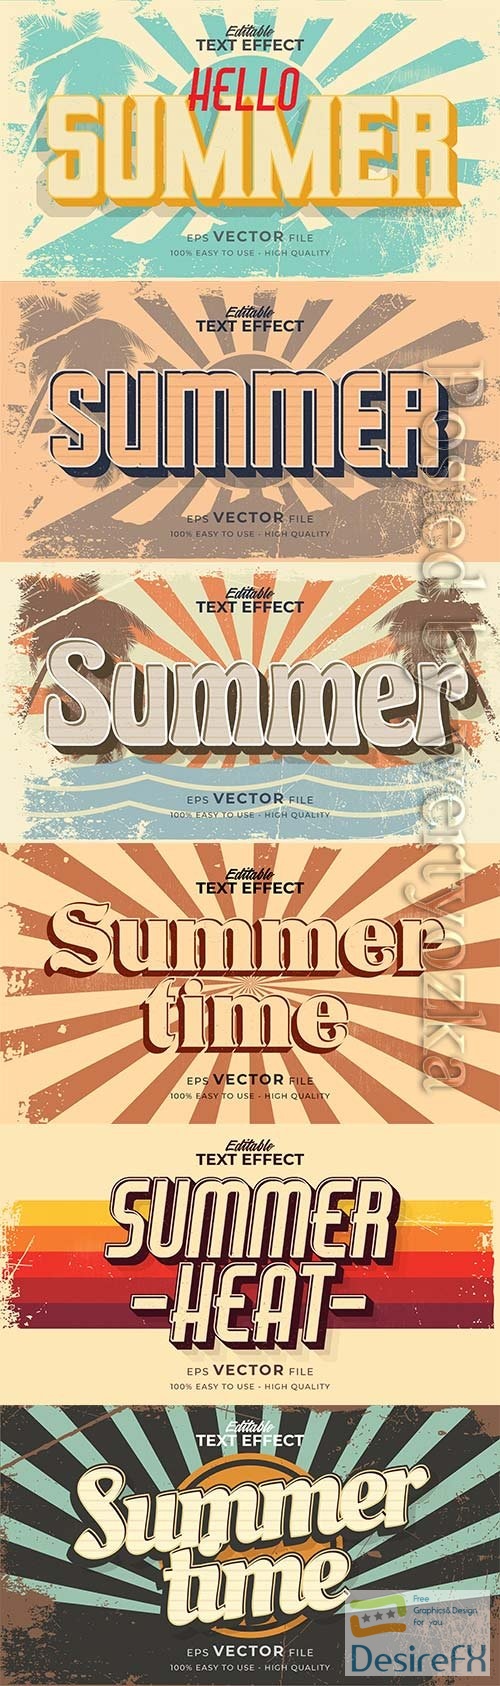 Text style effect, retro summer text in grunge style vol 2